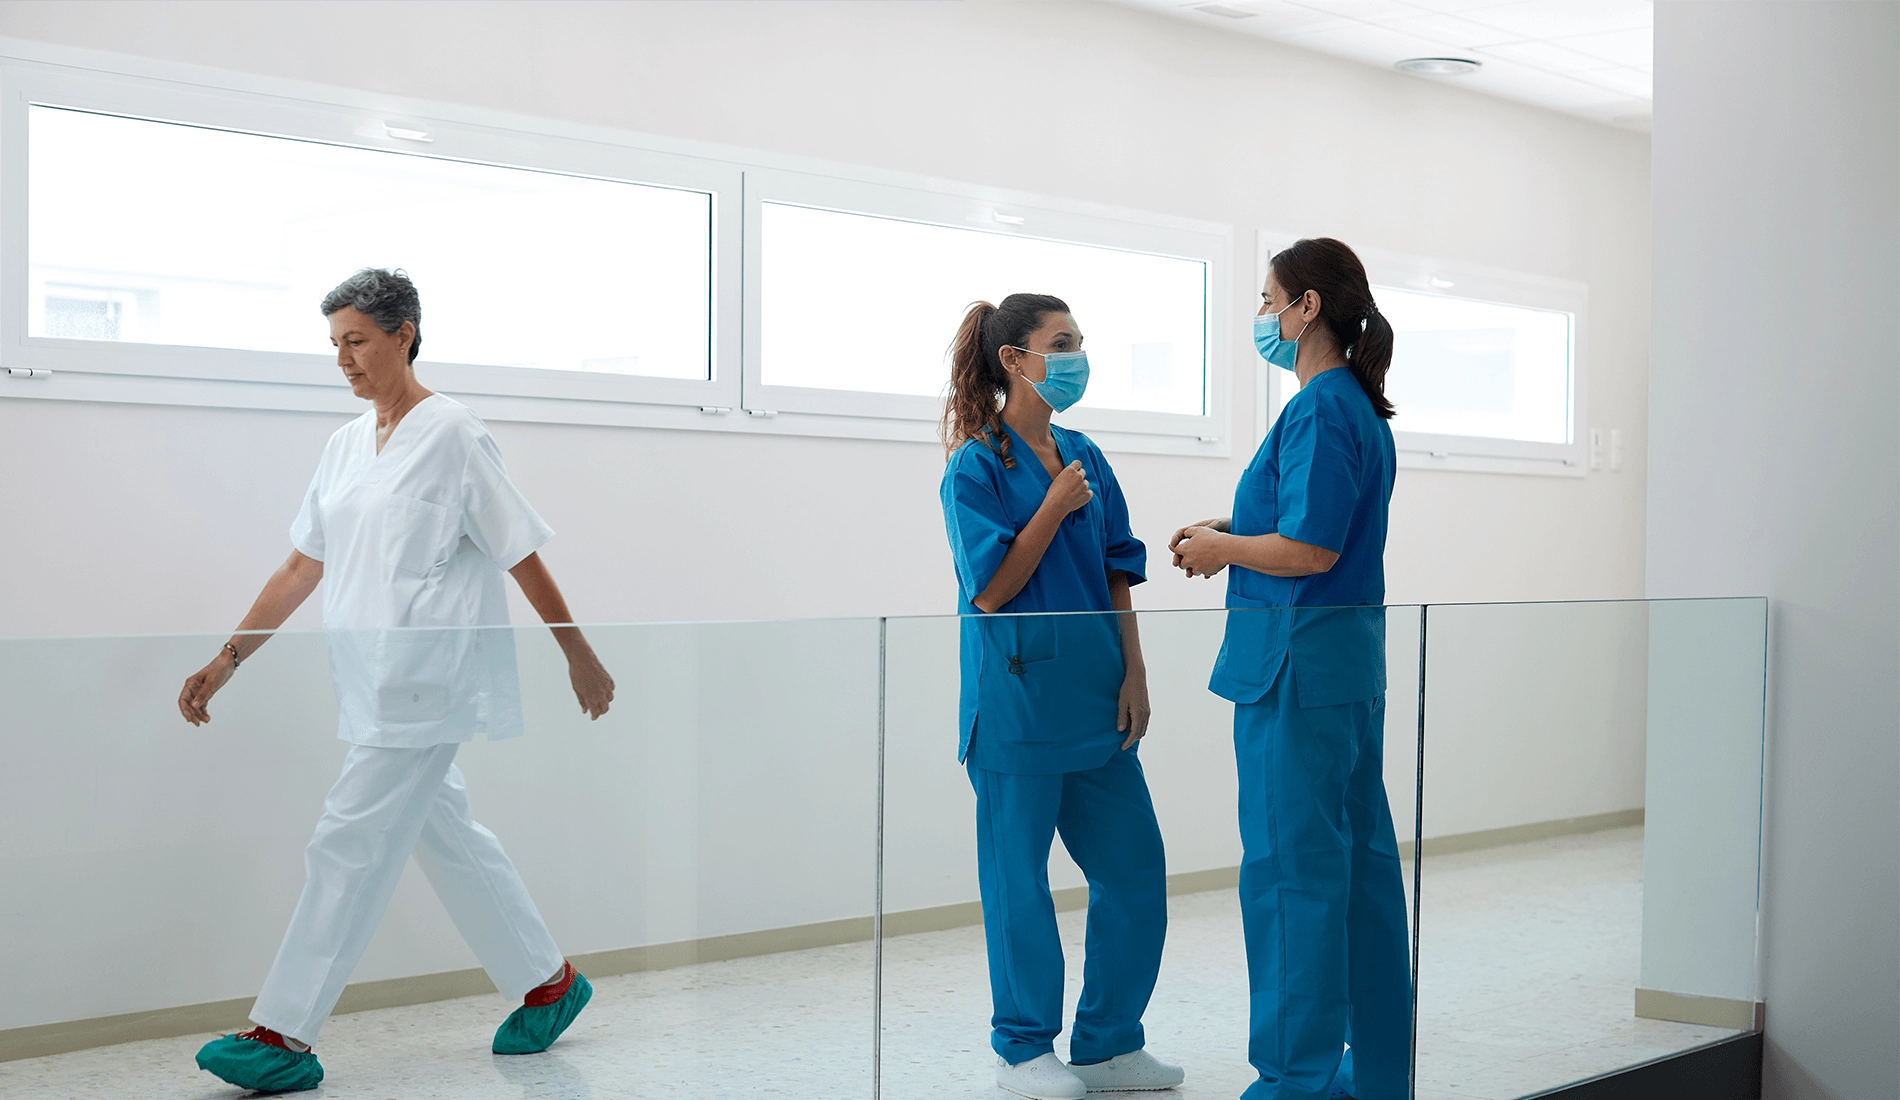 New facilities requirements are coming to the healthcare industry.